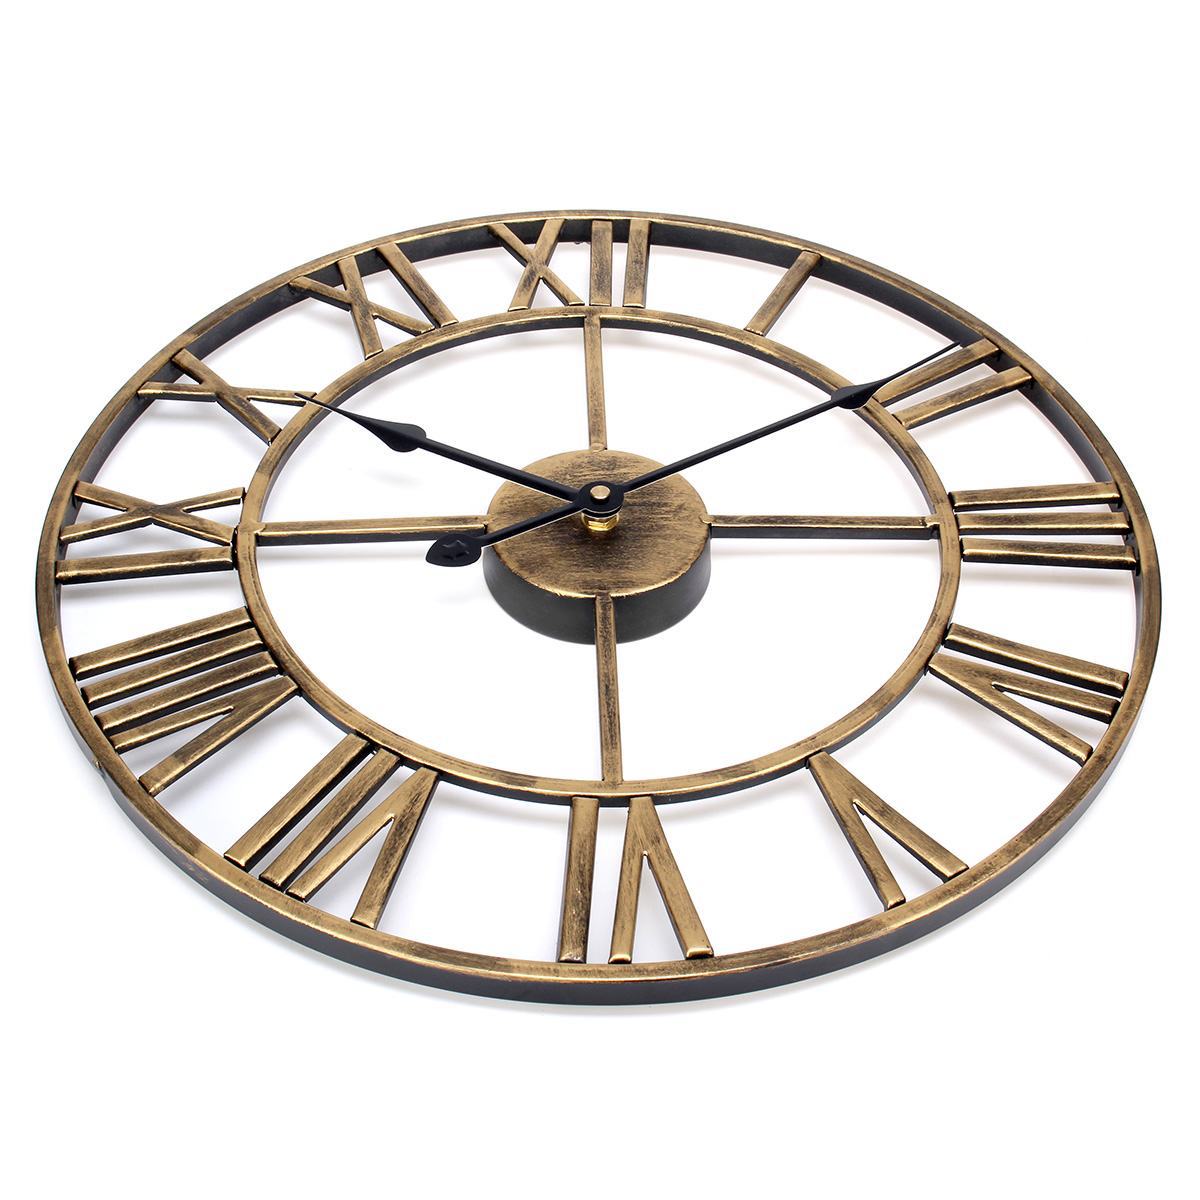 Roman Letters Large Silent Wall Clock 16 Inches Iron